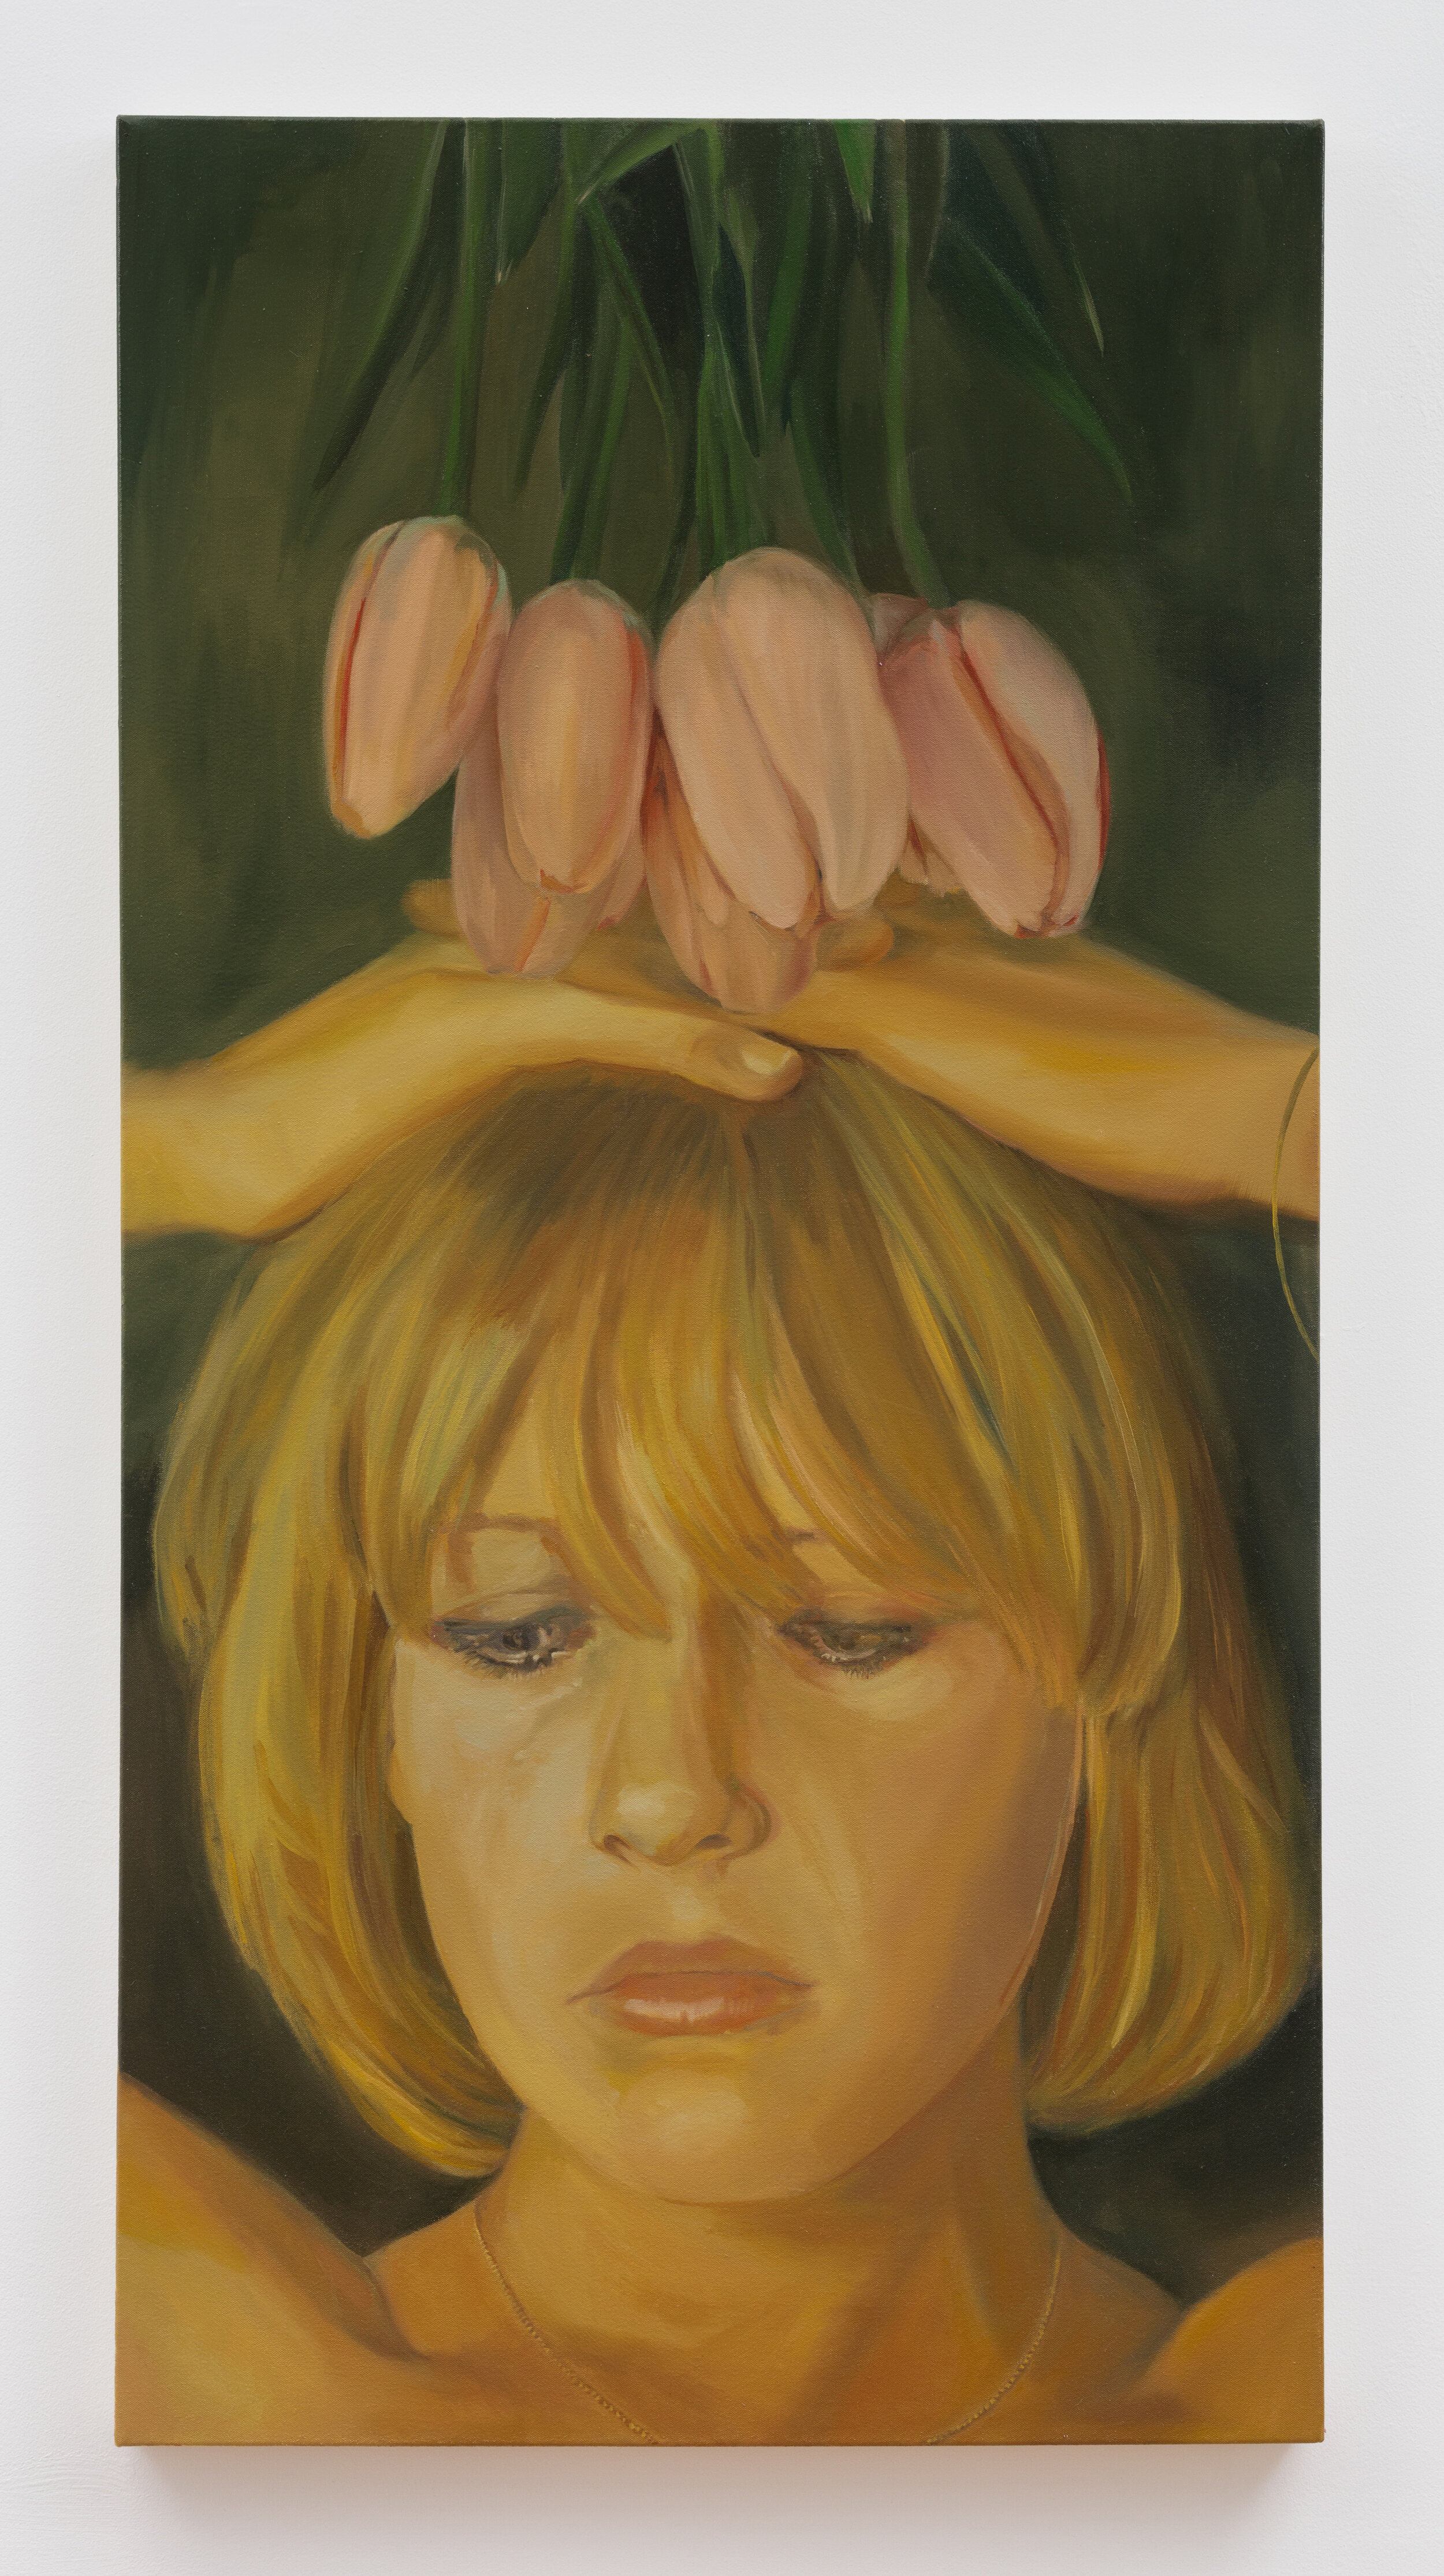   Woman with Tulips,  2019. Oil on canvas. 52 x 27 inches. 